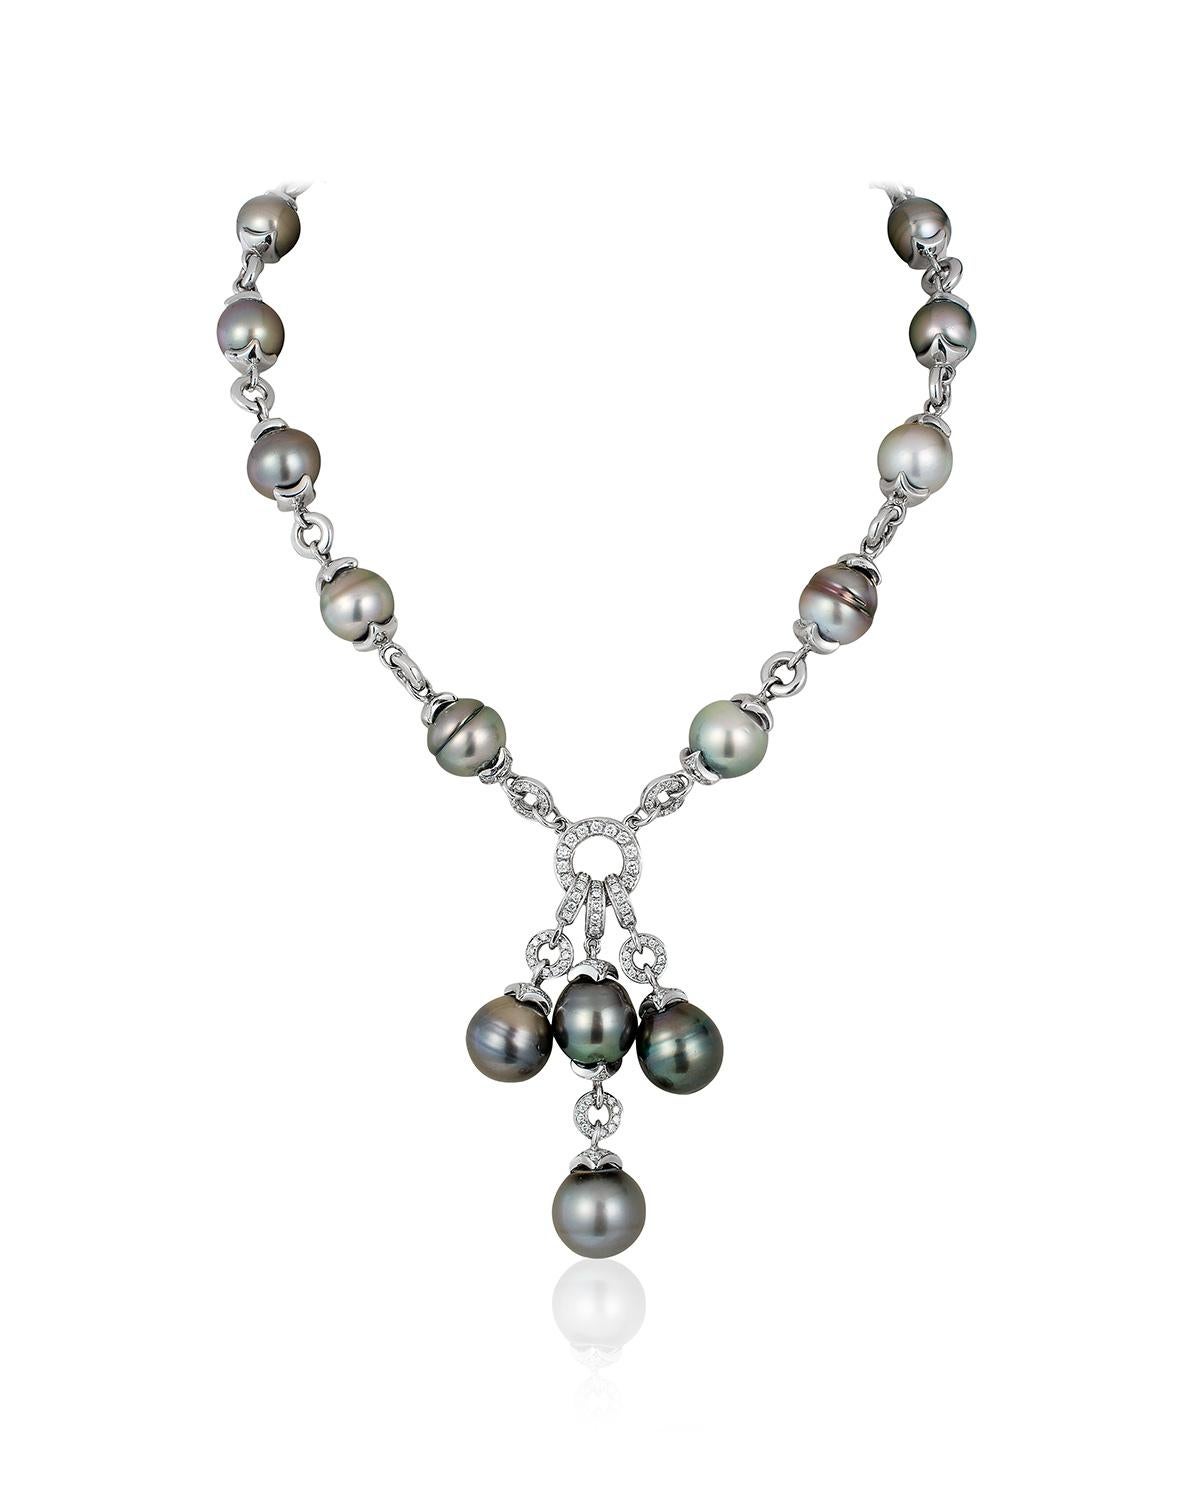 Andreoli Pearl Diamond 18 Karat Gold Drop Necklace

This necklace features:
- 1.79 Carat Diamond
- 45.00 g Pearl
- 50.10 g 18kt Gold
- Made In Italy